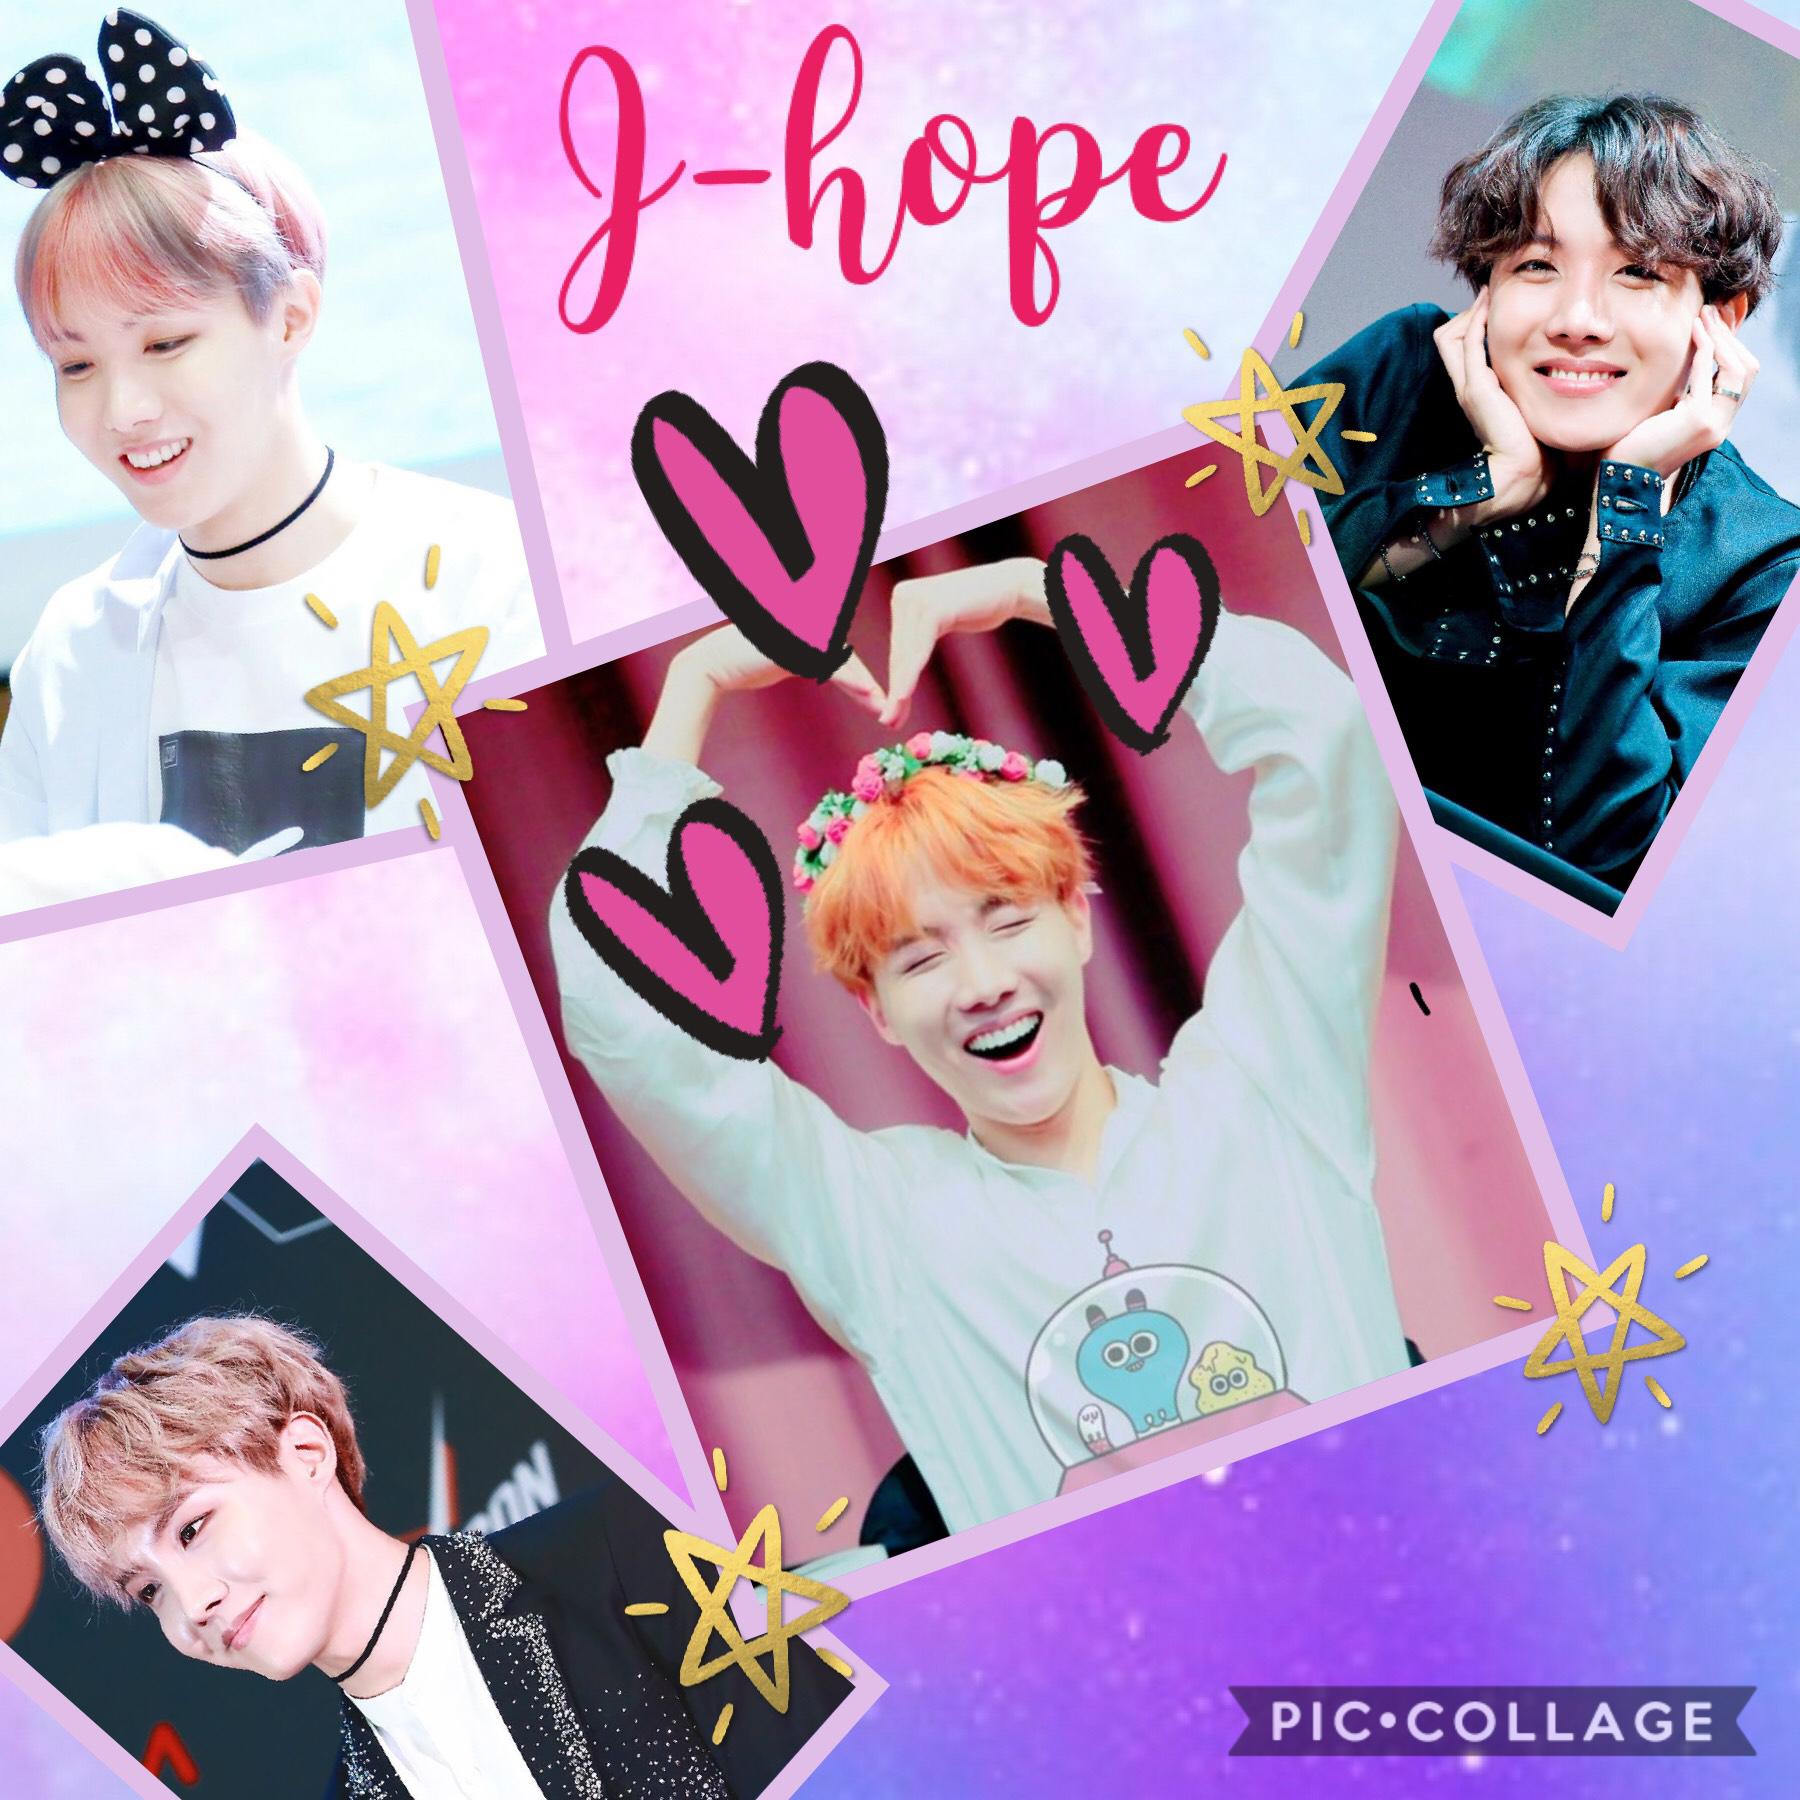 I made this for my best friend evey.   
                         💜J-HOPE💜